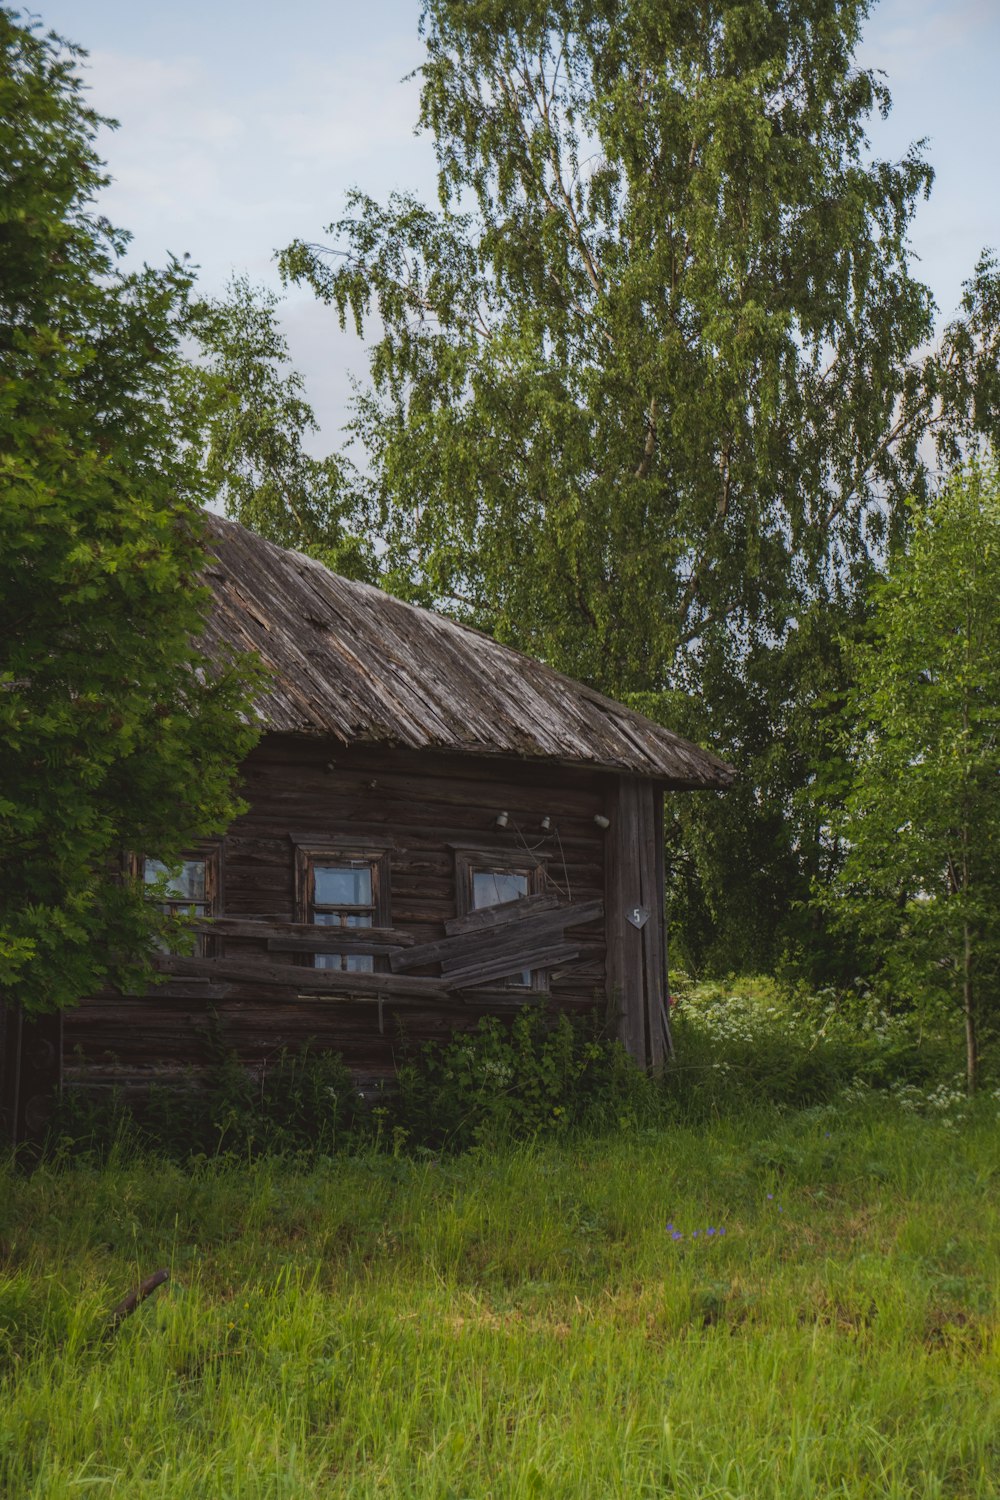 an old log cabin in a field with trees in the background